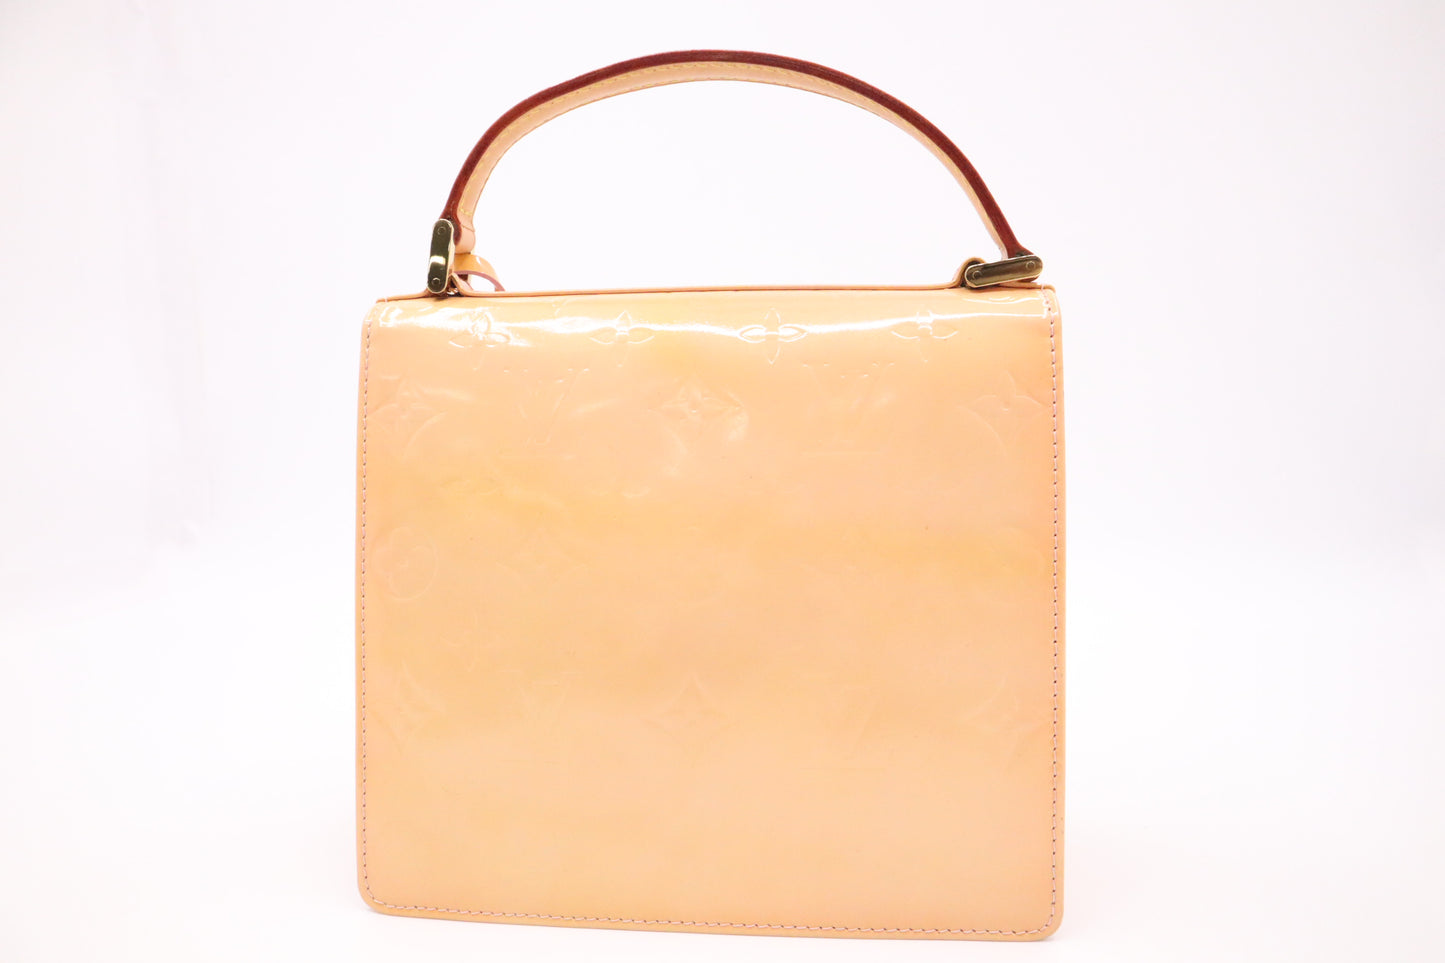 Louis Vuitton Spring Street in Peach Vernis Leather